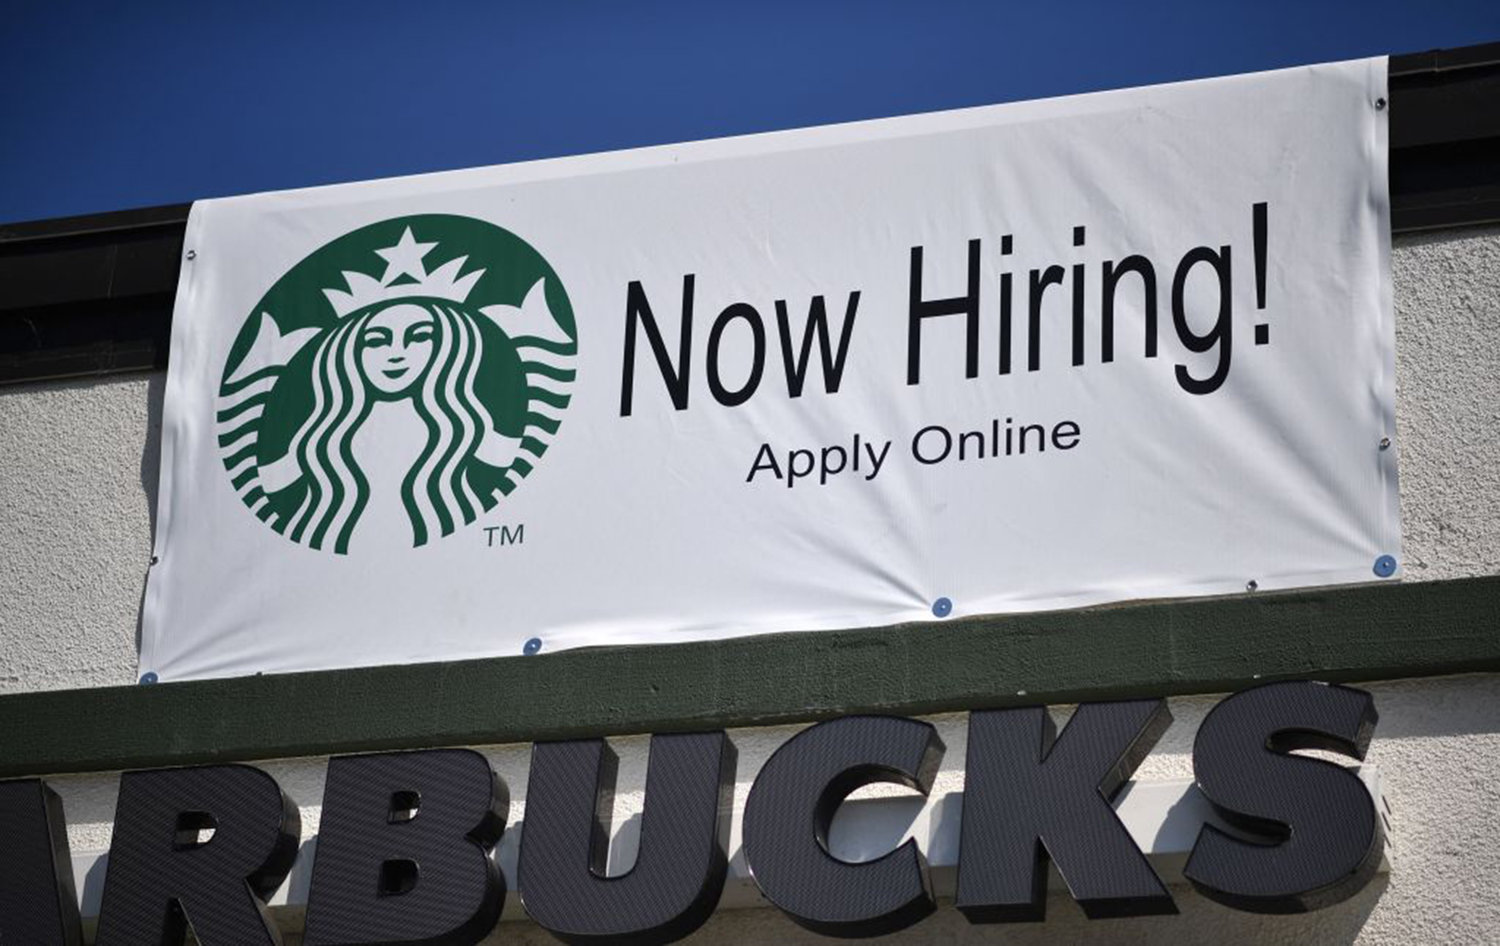 A "Now Hiring" sign is displayed outside a Starbucks drive-thru coffee shop in Glendale, California, July 7, 2021.  (Robyn Beck/AFP via Getty Images/TNS)